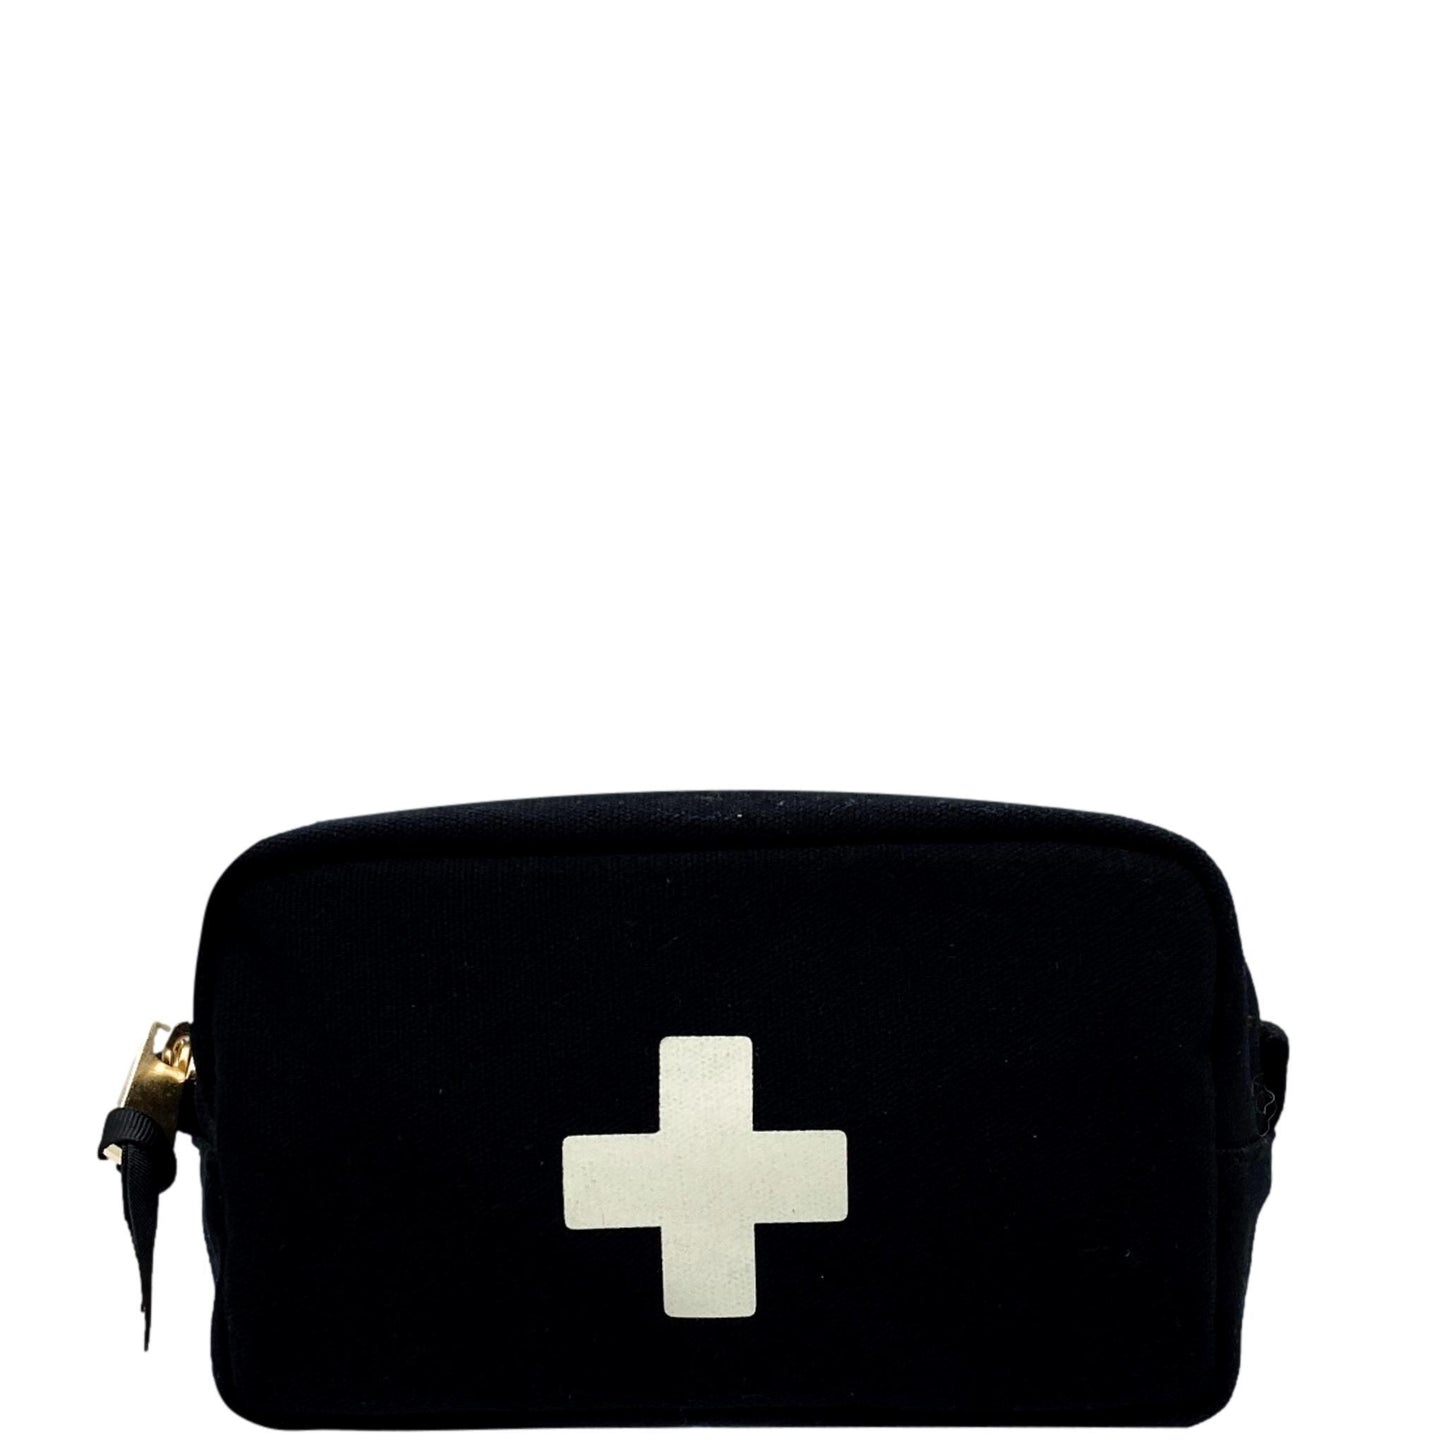 First Aid Organizing Case - Black - Bag-all Europe